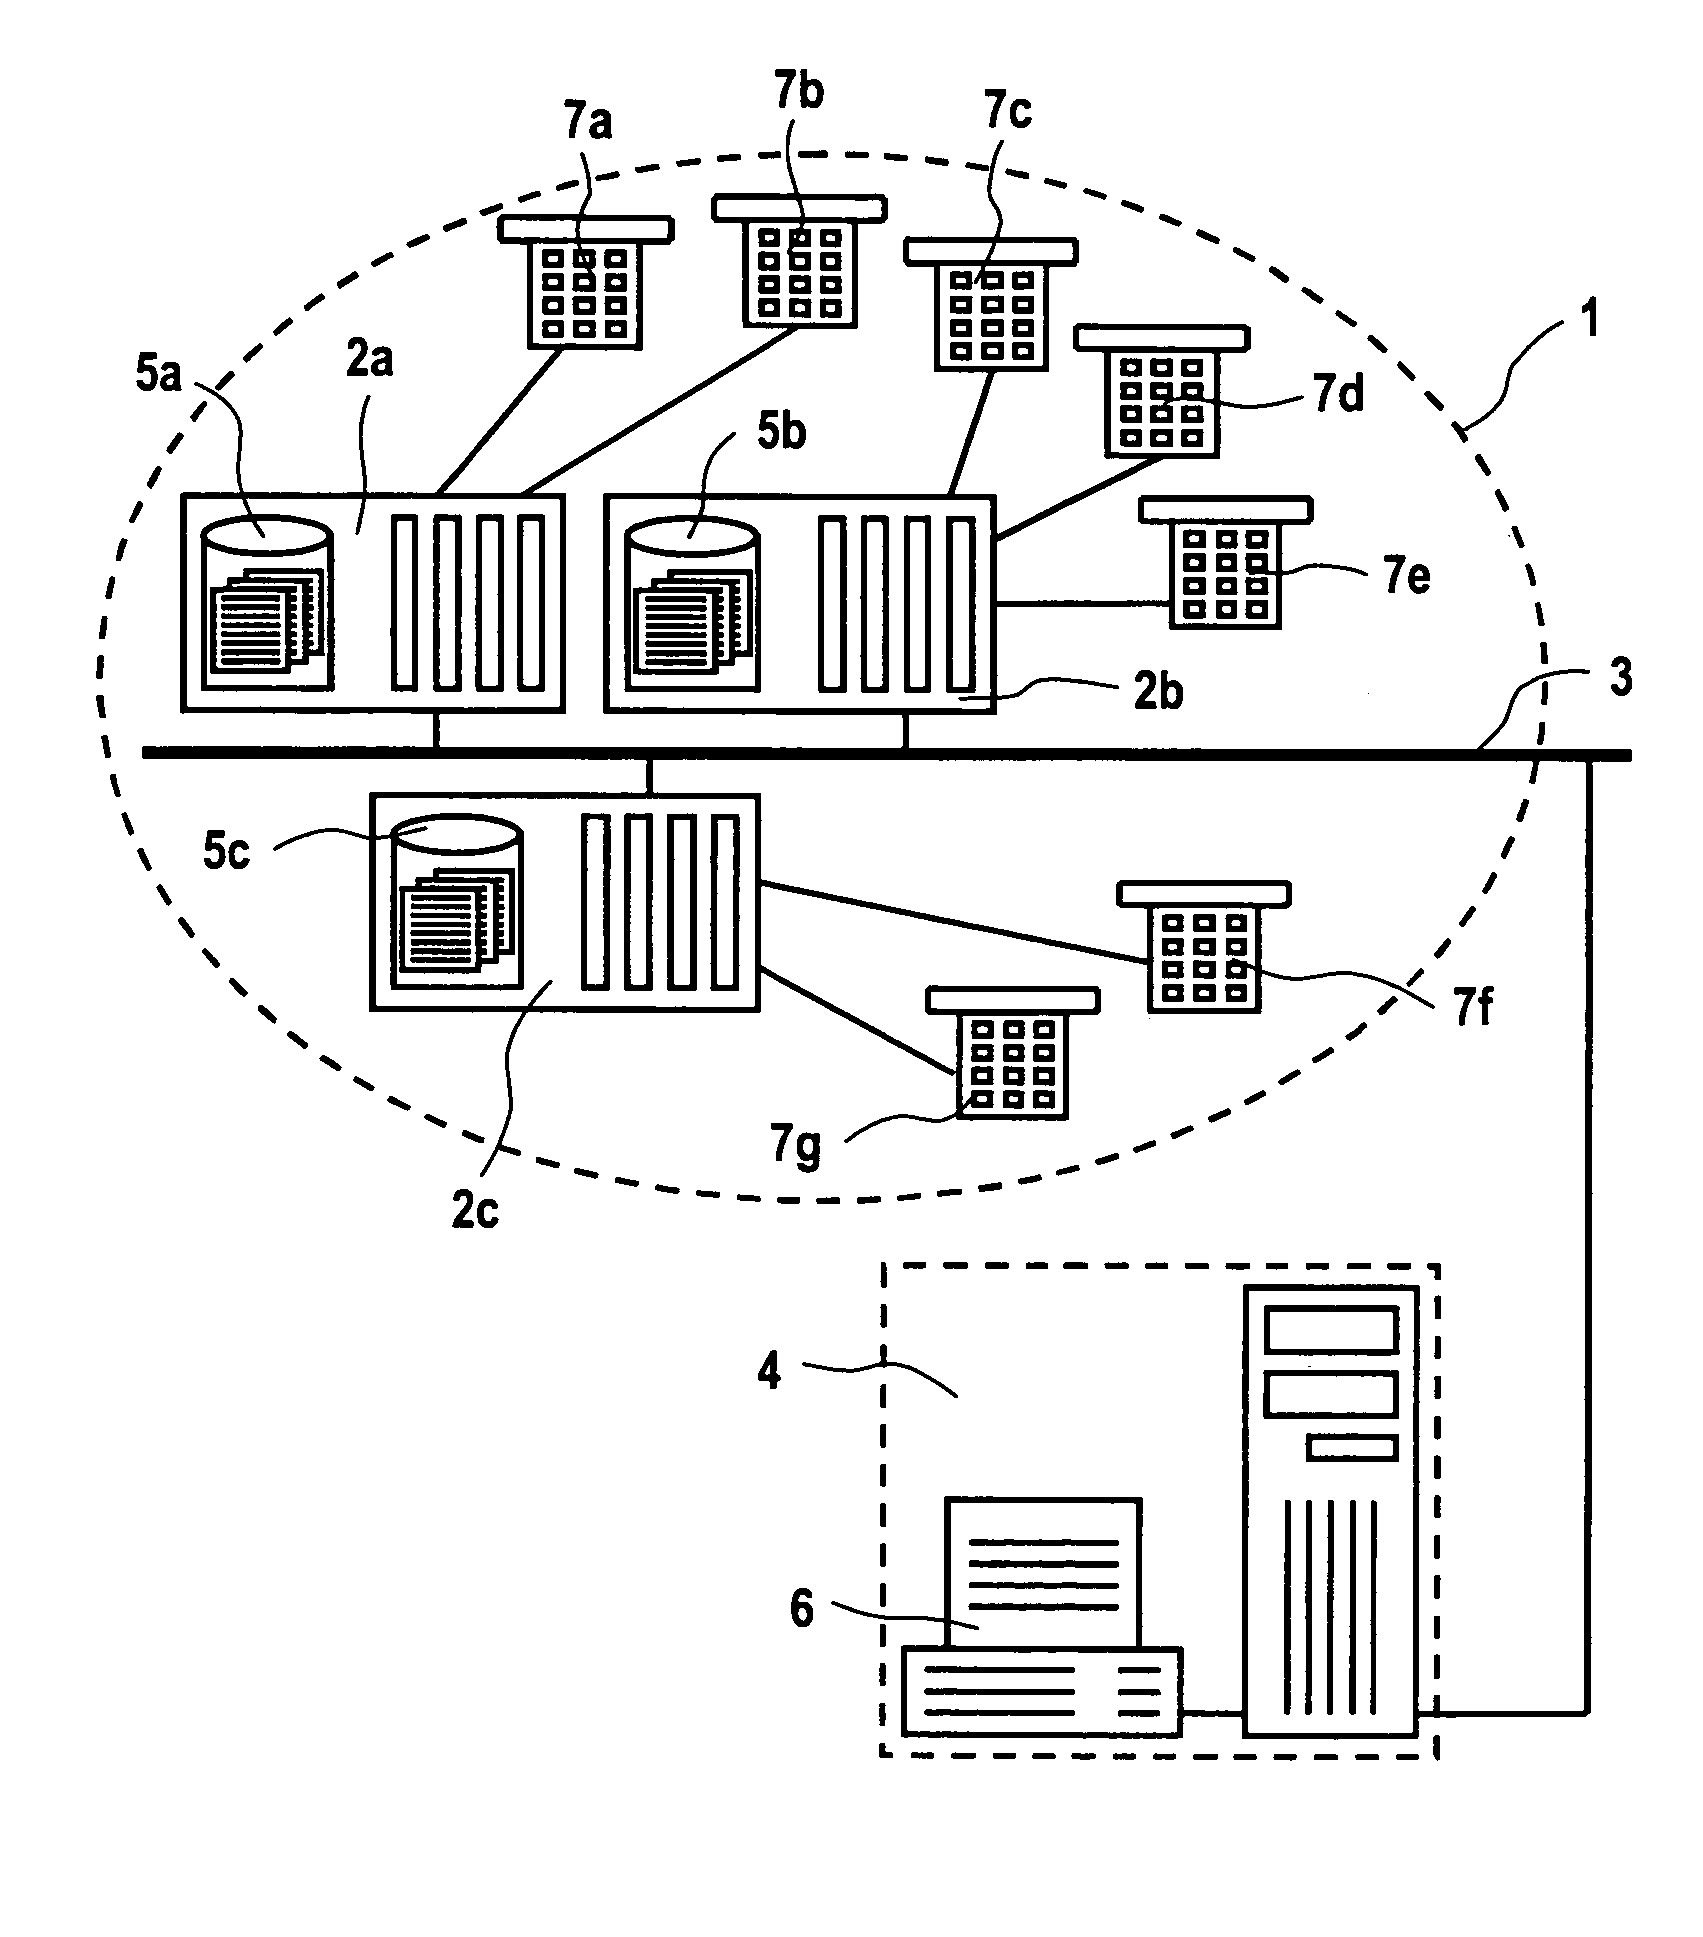 Method and device for forming groups from subscribers to a communication network